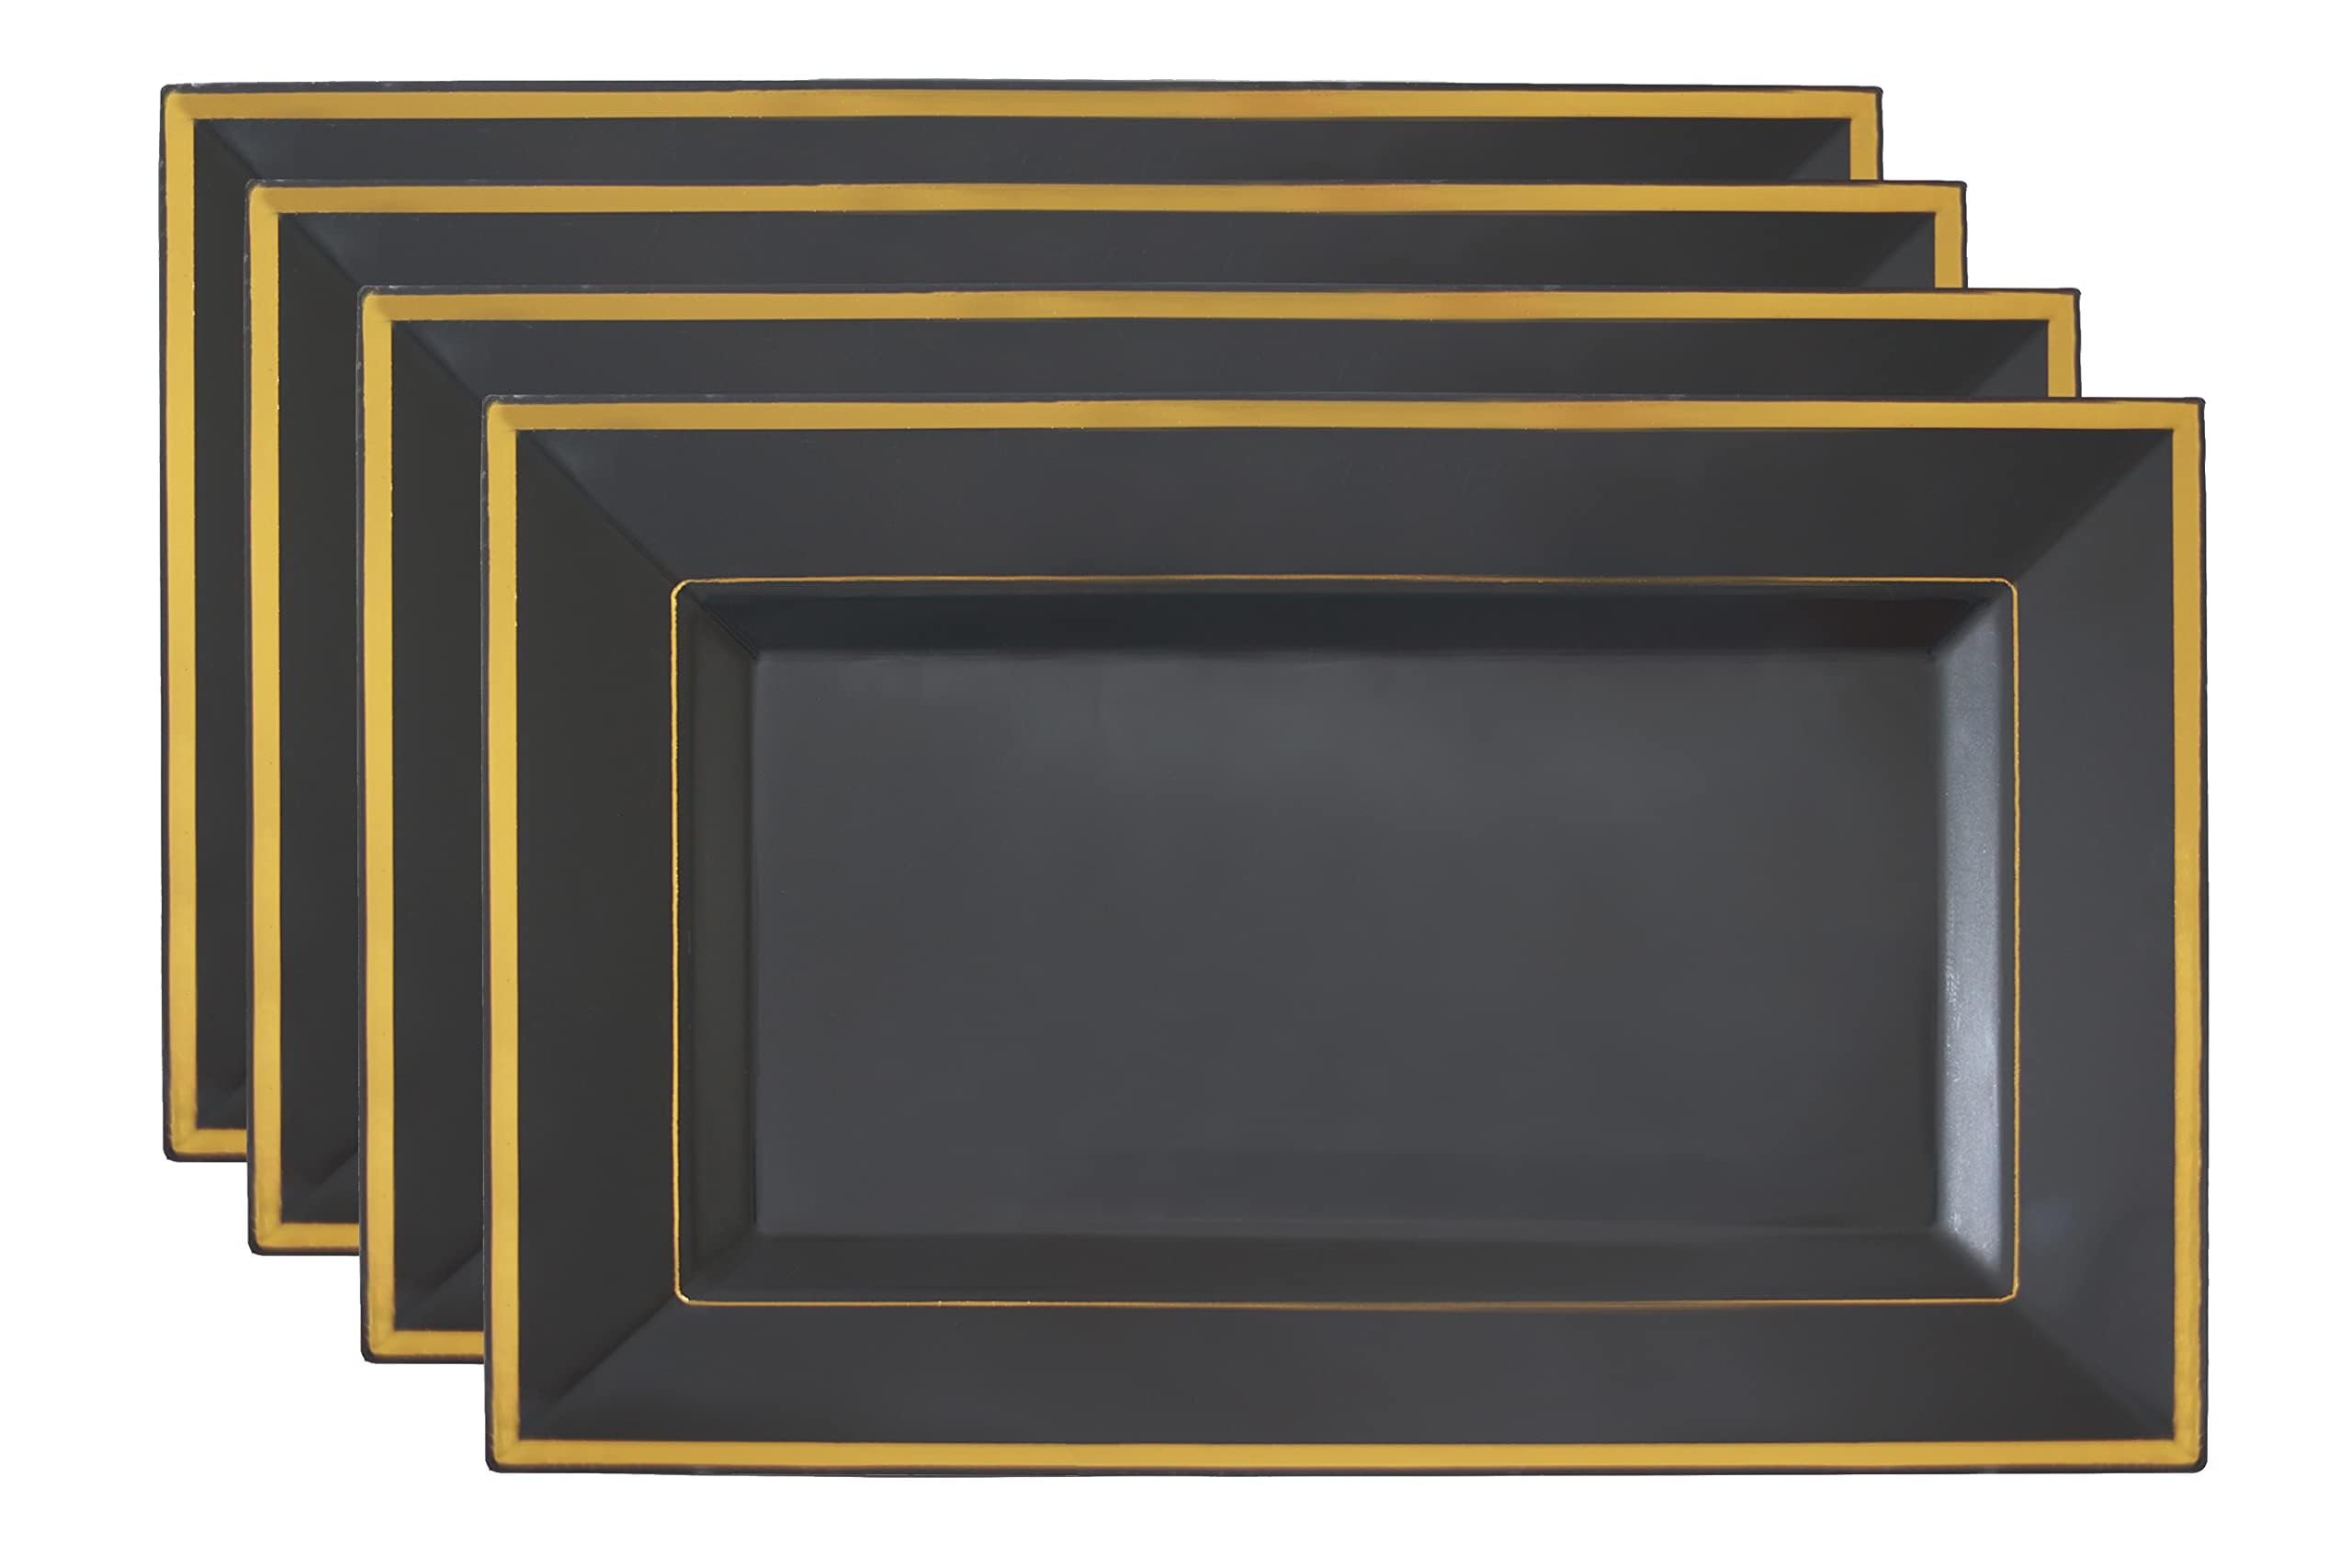 Hard Plastic Serving Tray Set, Black & Gold Rim Disposable Serving Trays & Platters for Food, Large Plastic Trays for Parties, Weddings, Food Trays for Cookies, Dessert, 8" x 13", 4 Pack